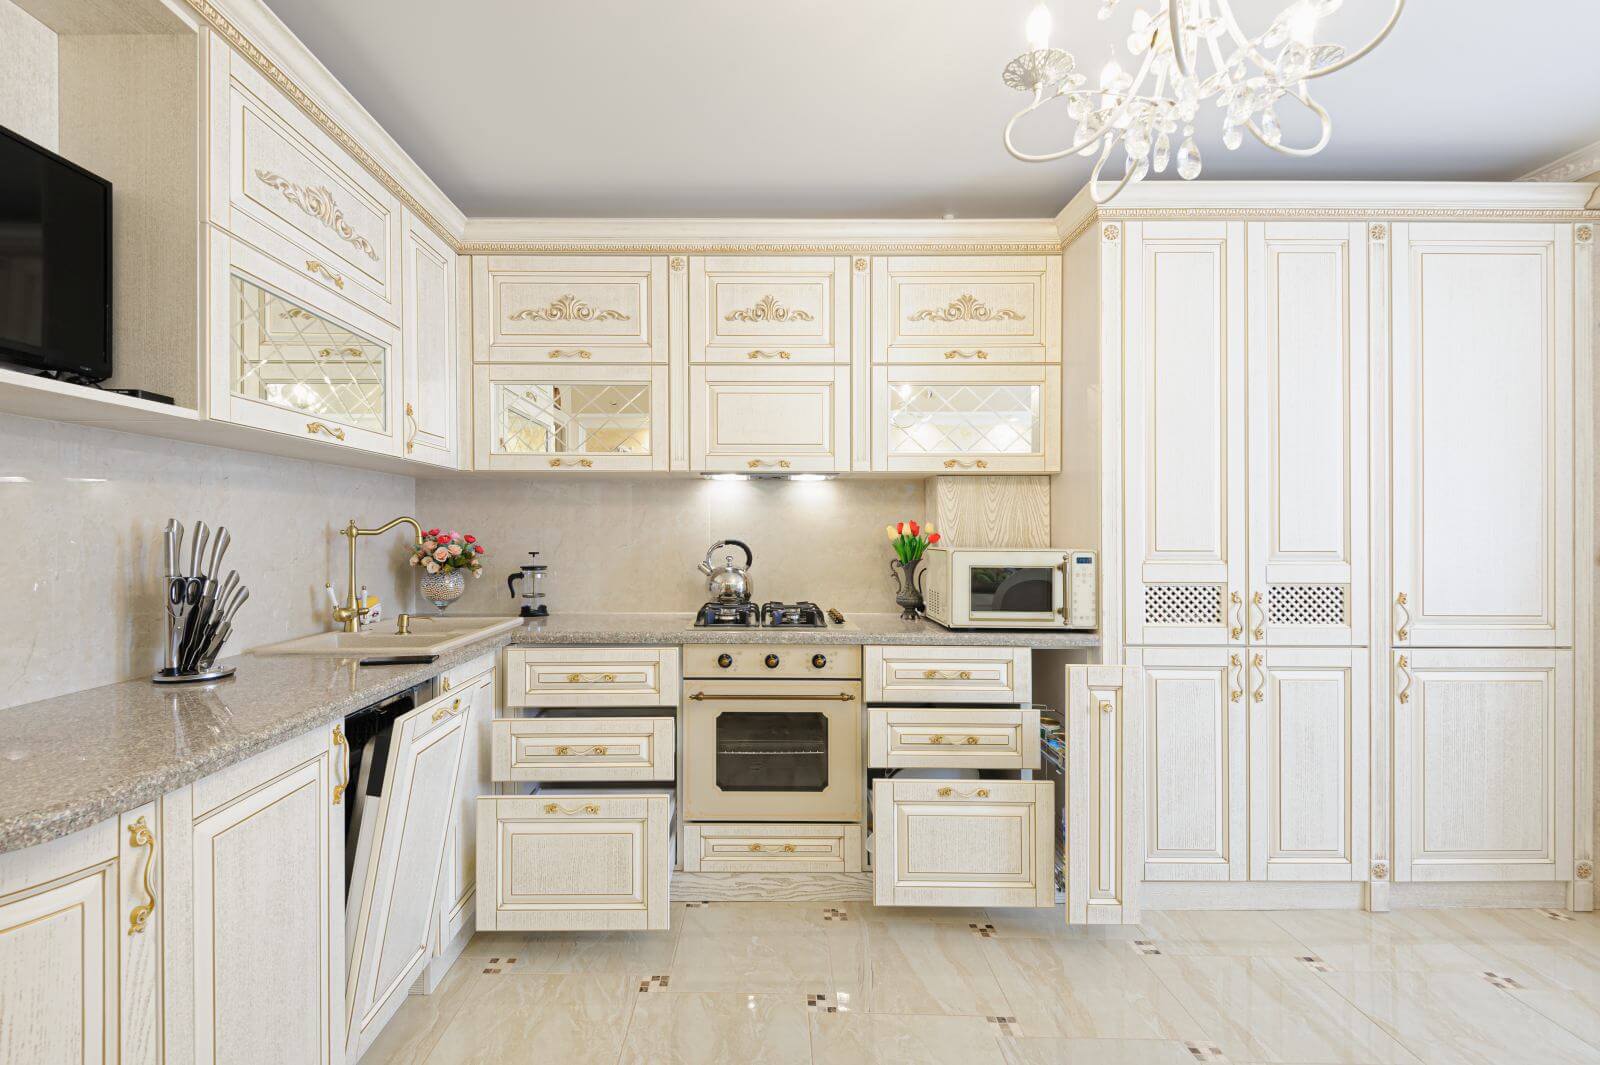 Luxury modern beige and cream colored kitchen in modern classic style. Some drawers are open